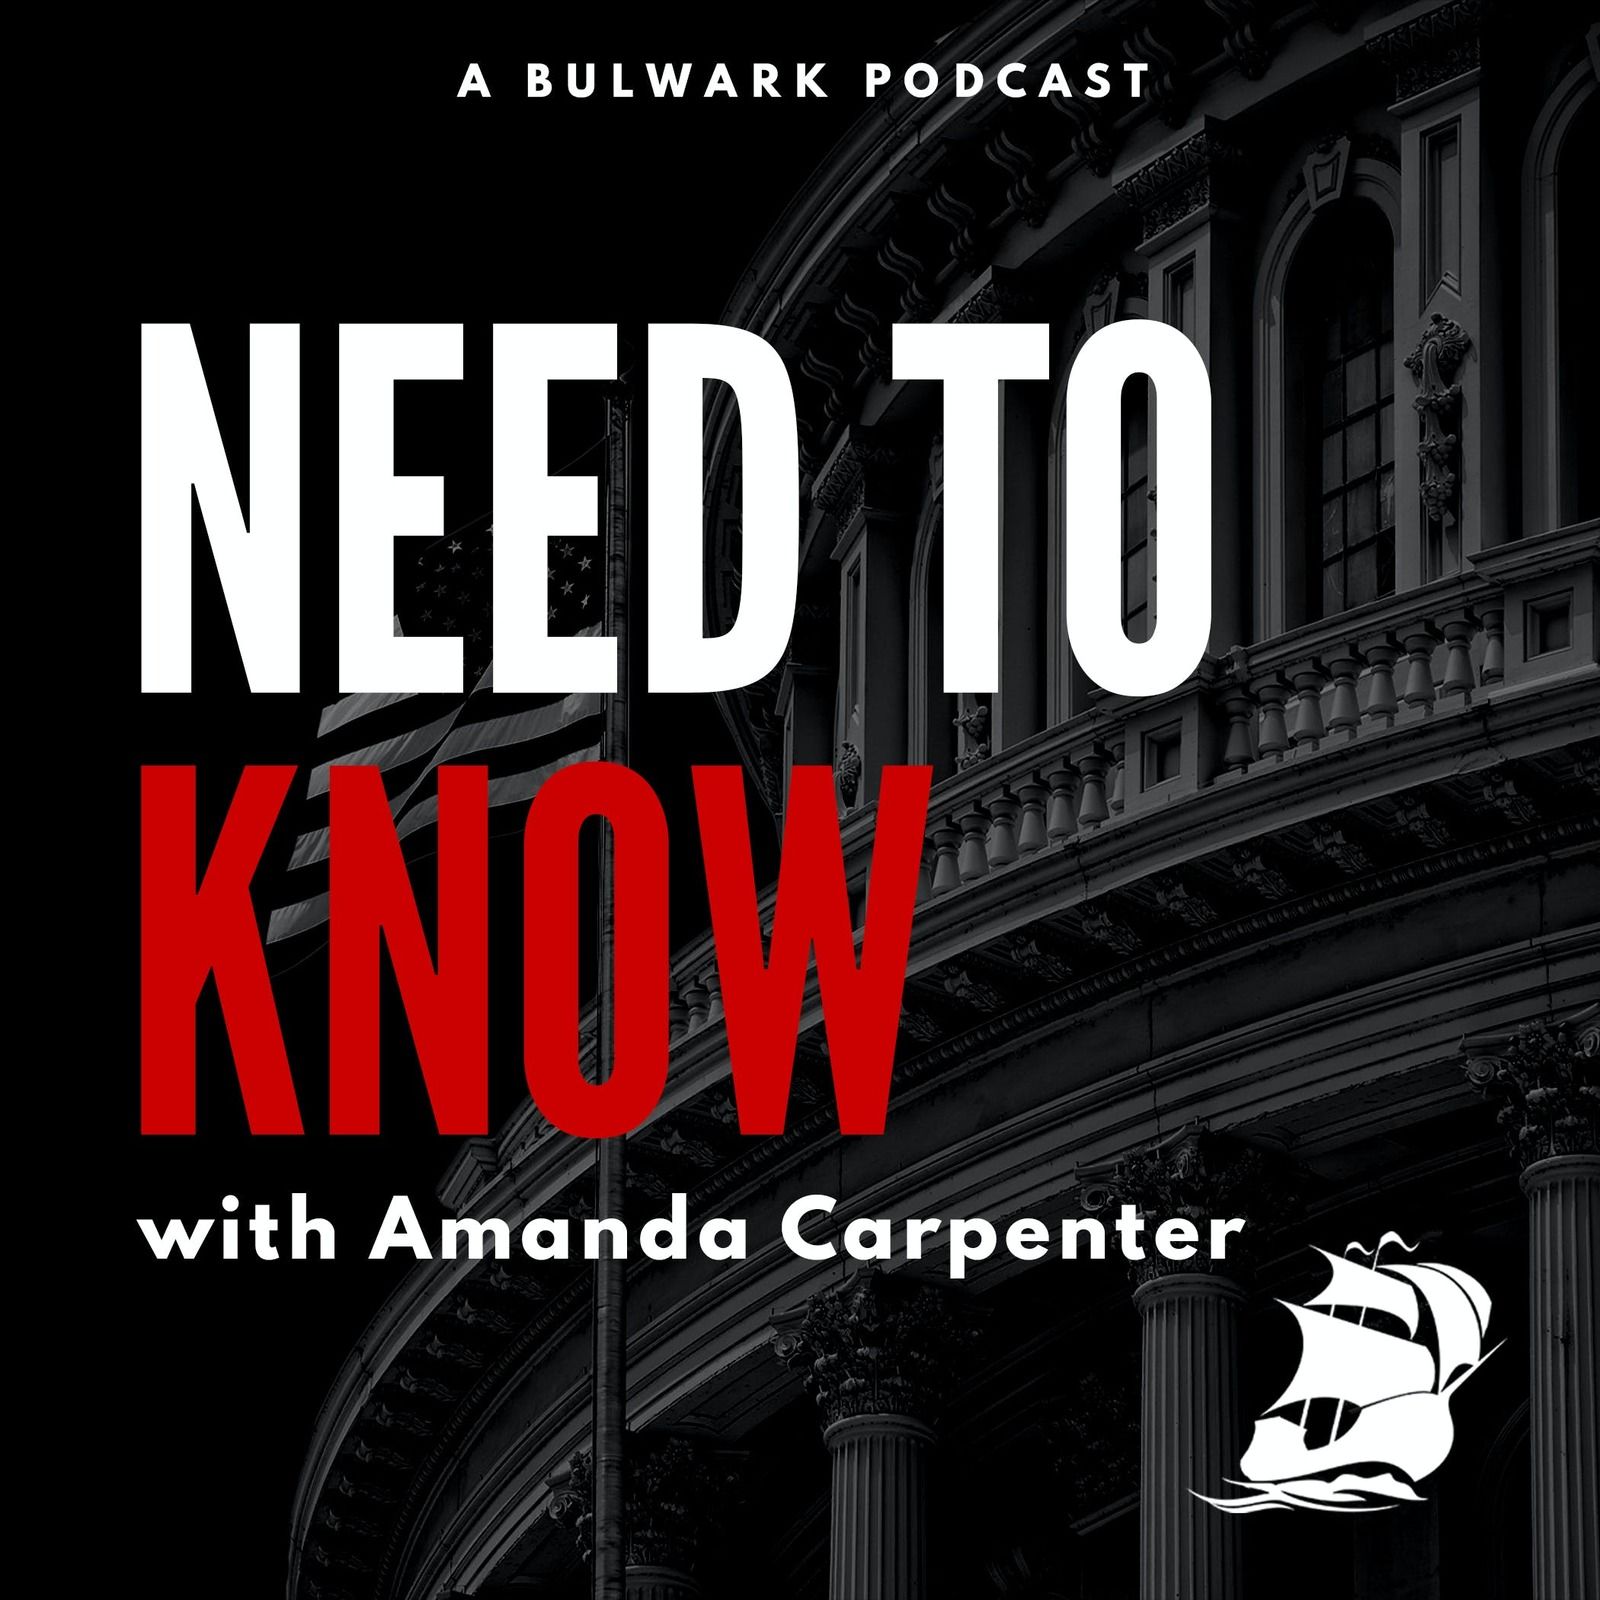 Amanda Carpenter: Need to Know by The Bulwark Podcast